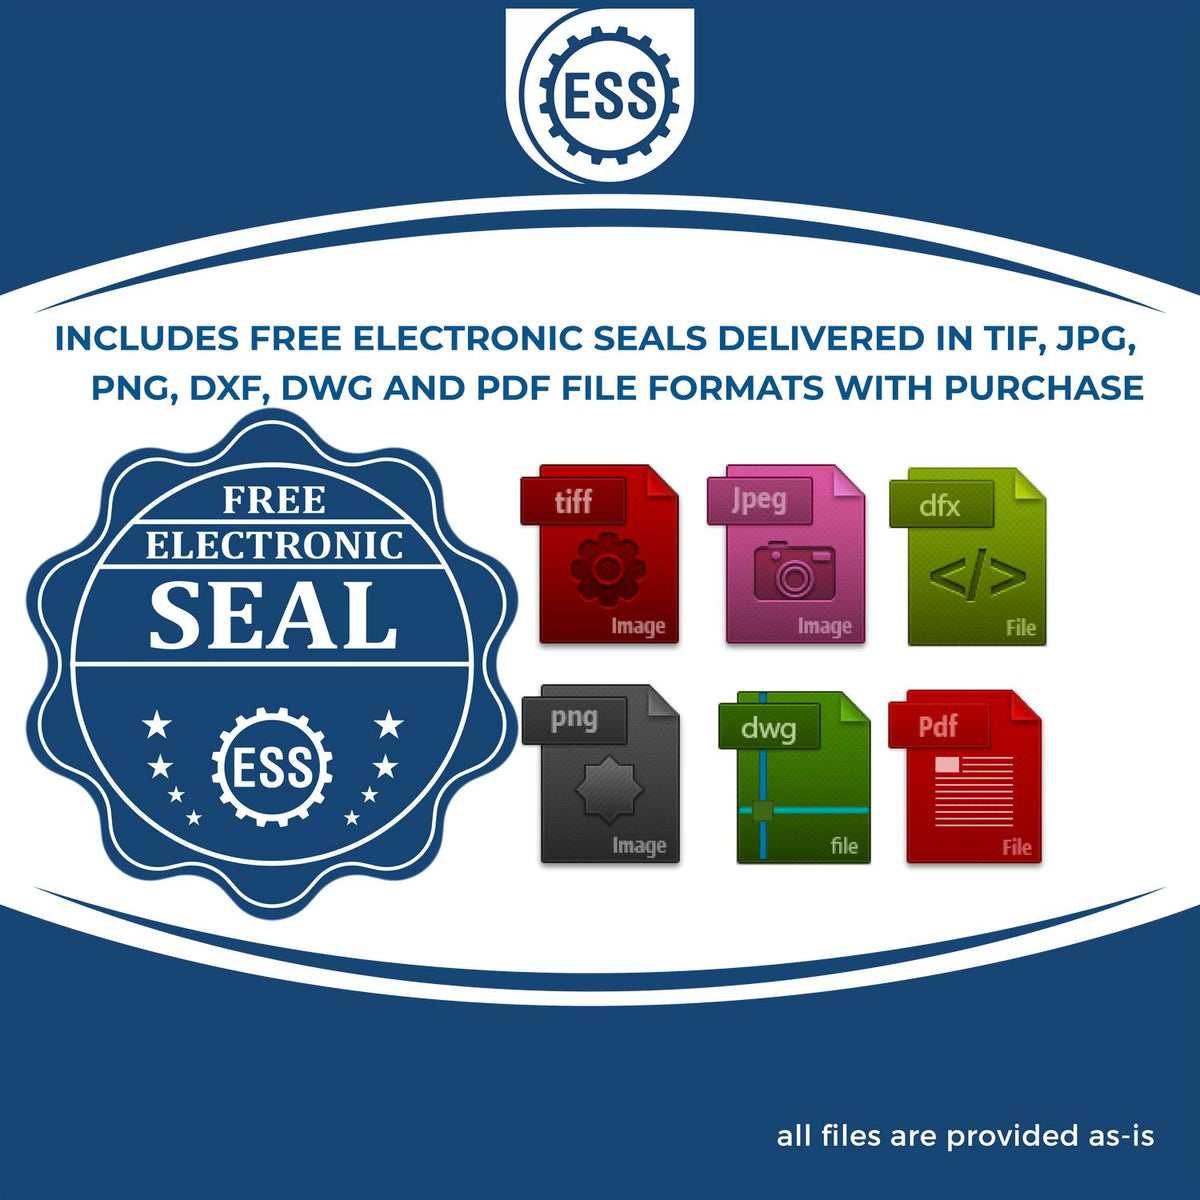 An infographic for the free electronic seal for the Long Reach New Mexico PE Seal illustrating the different file type icons such as DXF, DWG, TIF, JPG and PNG.